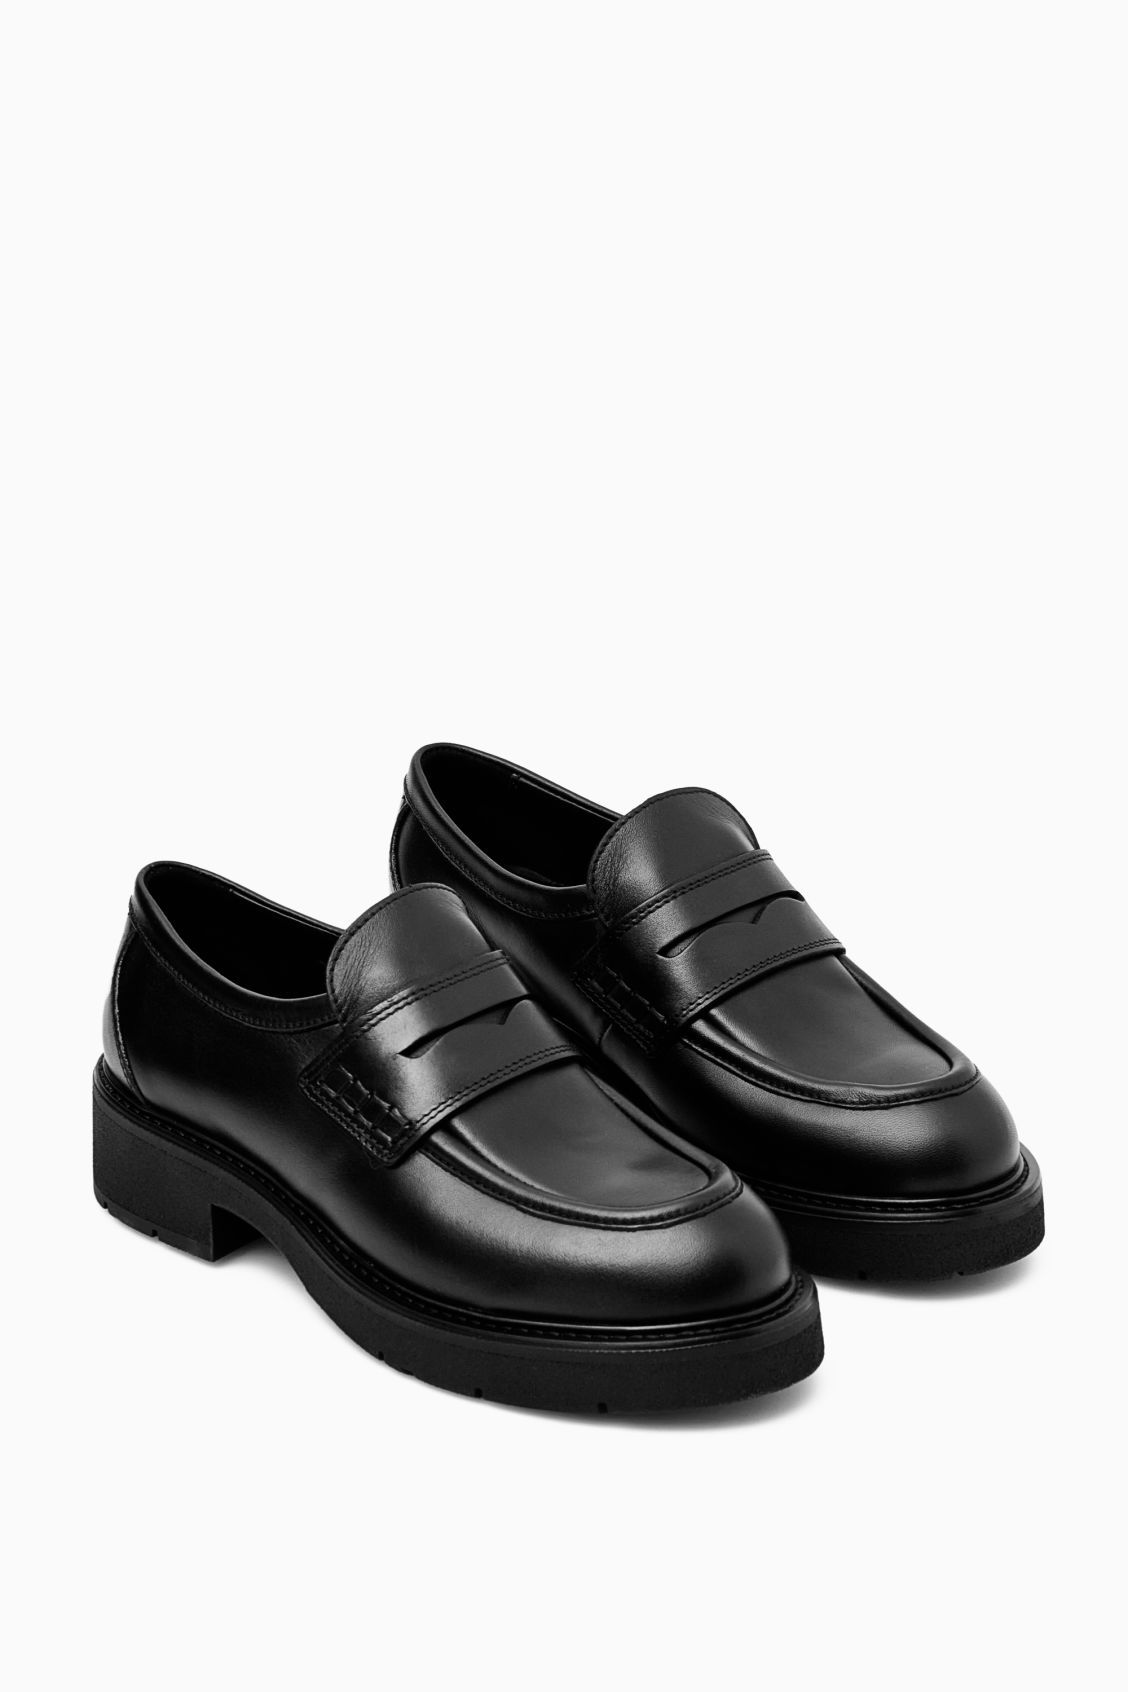 CHUNKY LEATHER PENNY LOAFERS | COS UK